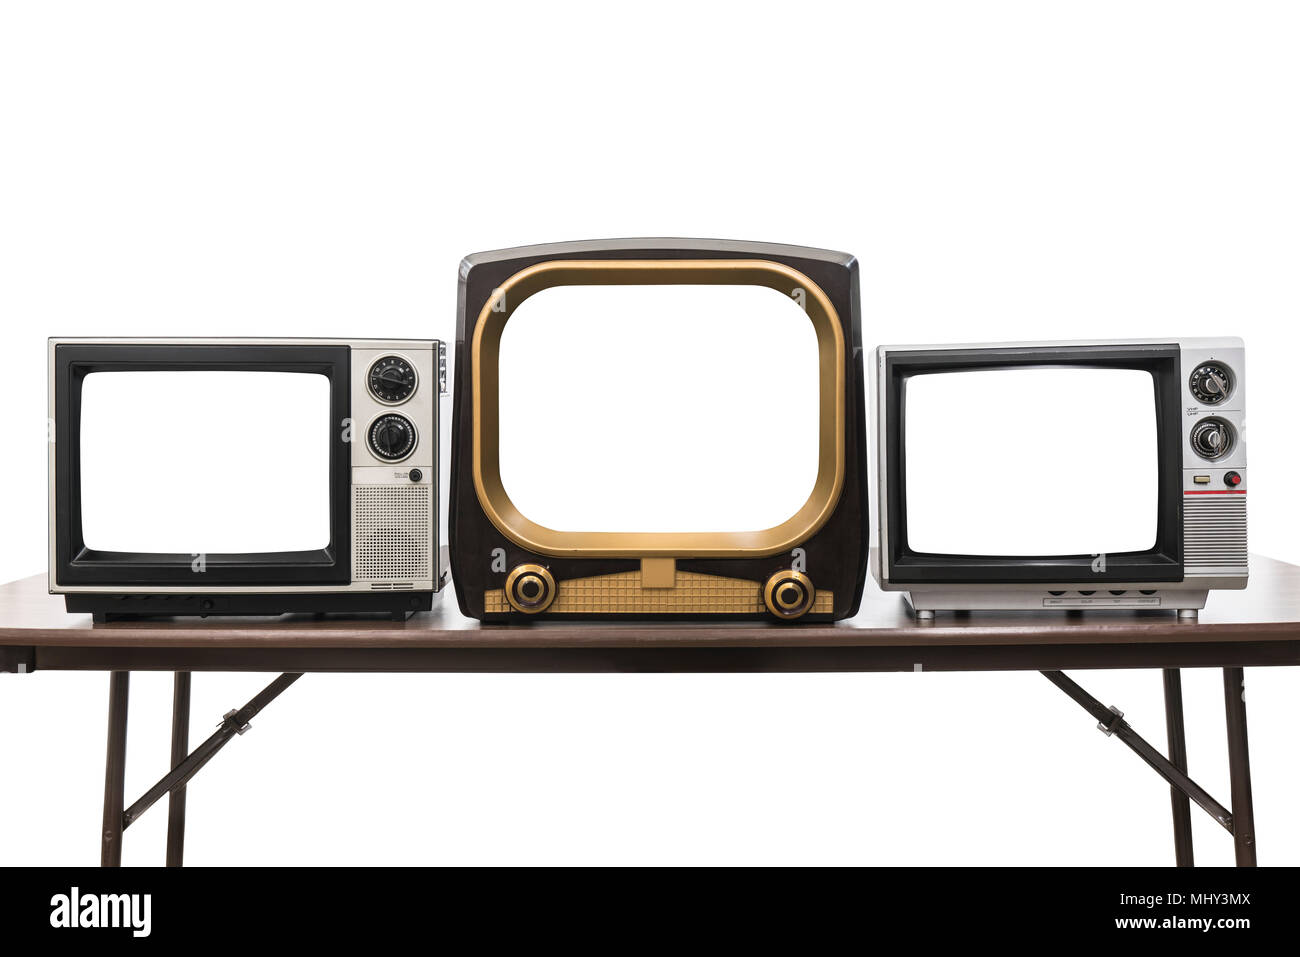 Three Vintage Televisions Isolated On White With Empty Screens And